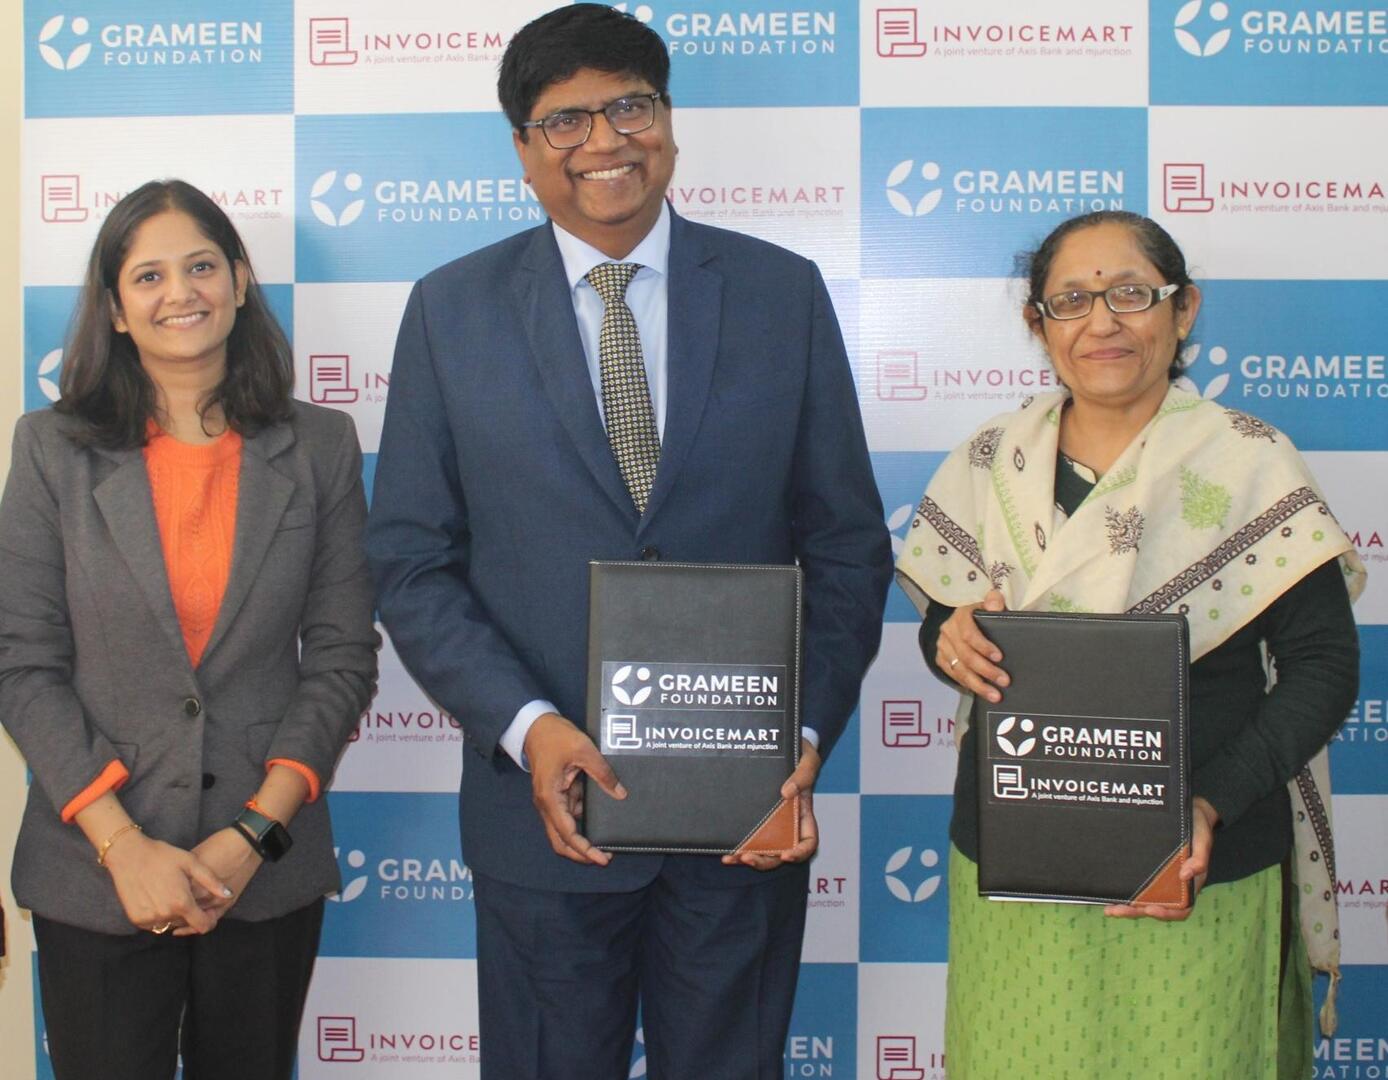 Invoicemart partners with Grameen Foundation for Social Impact to empower Women-led MSMEs